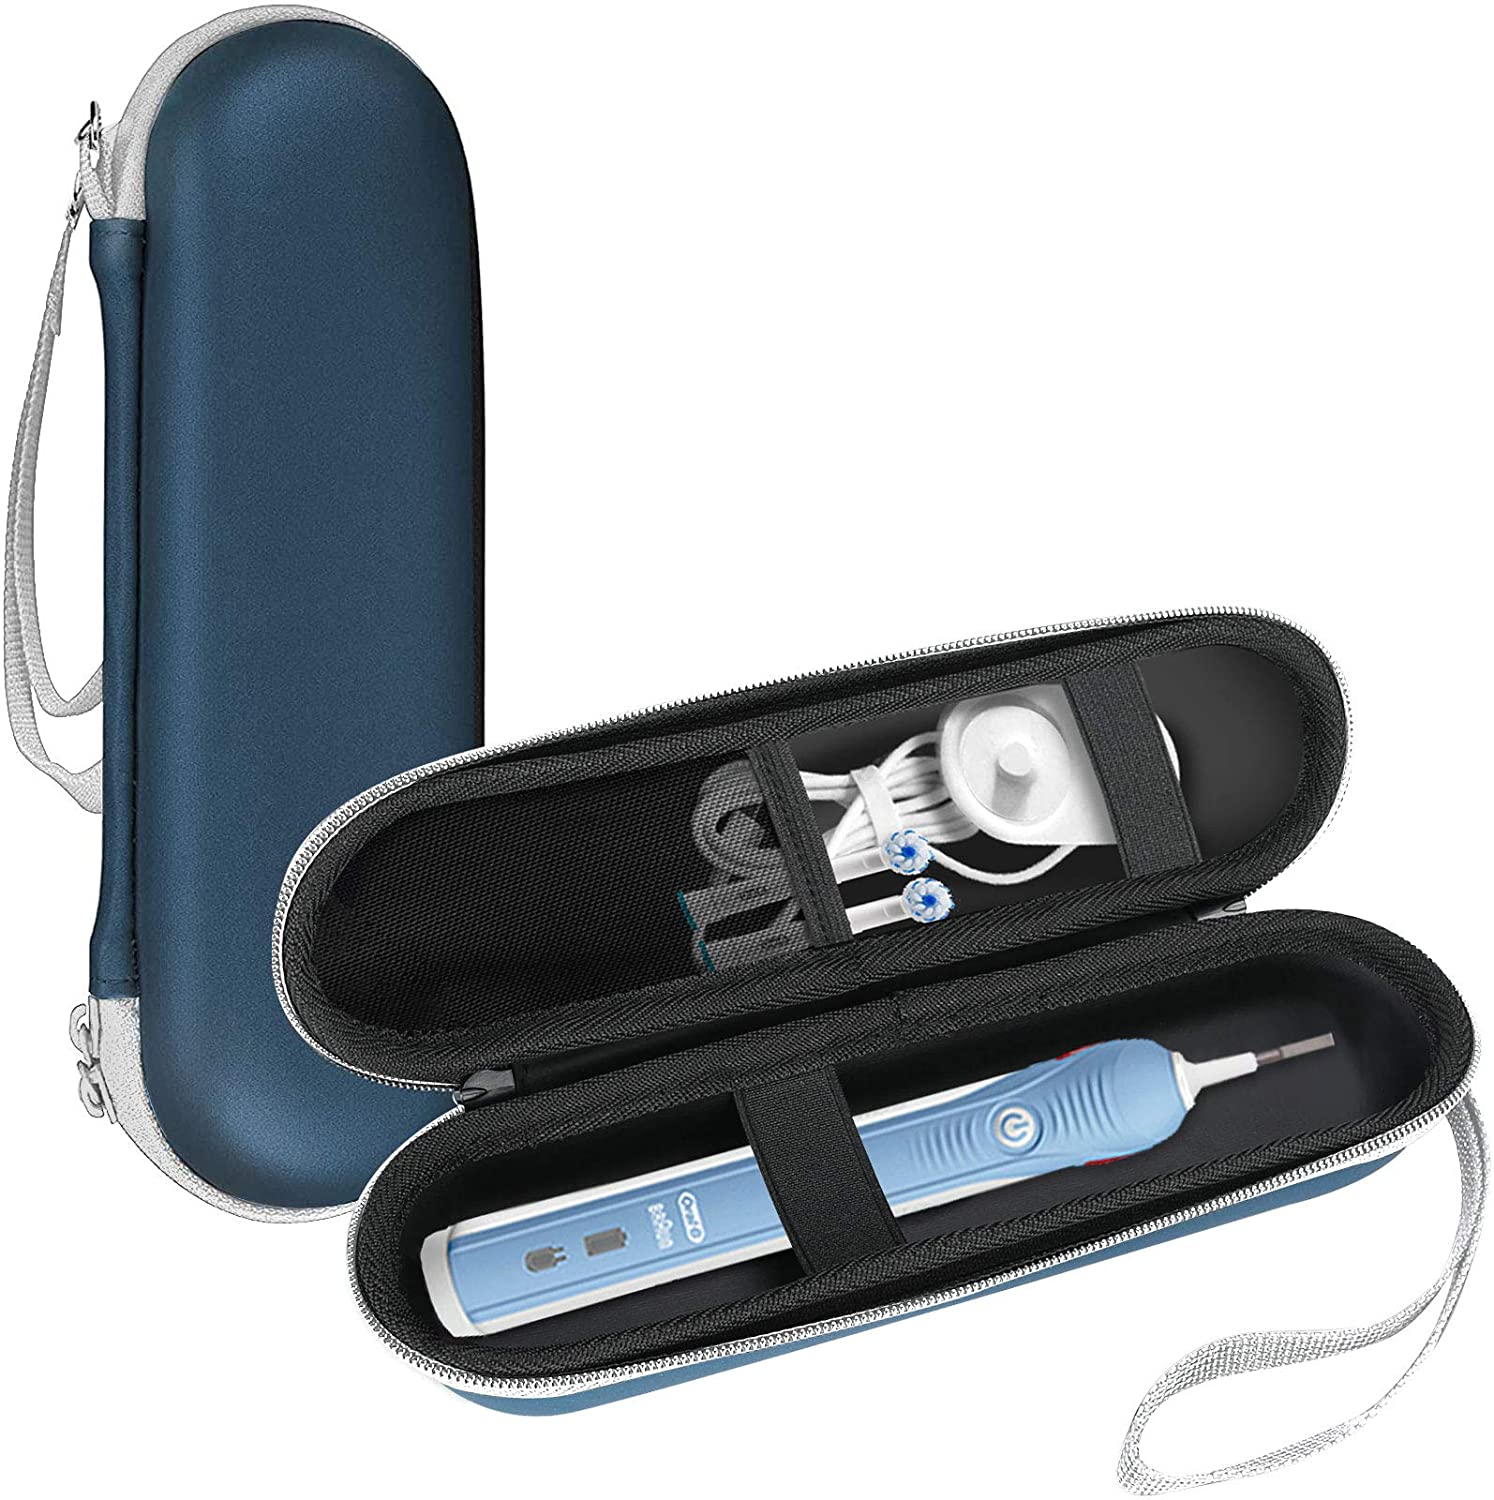 Electric Toothbrush Hard Travel Case Fit for Oral-b Pro 1000 | ProCase navy